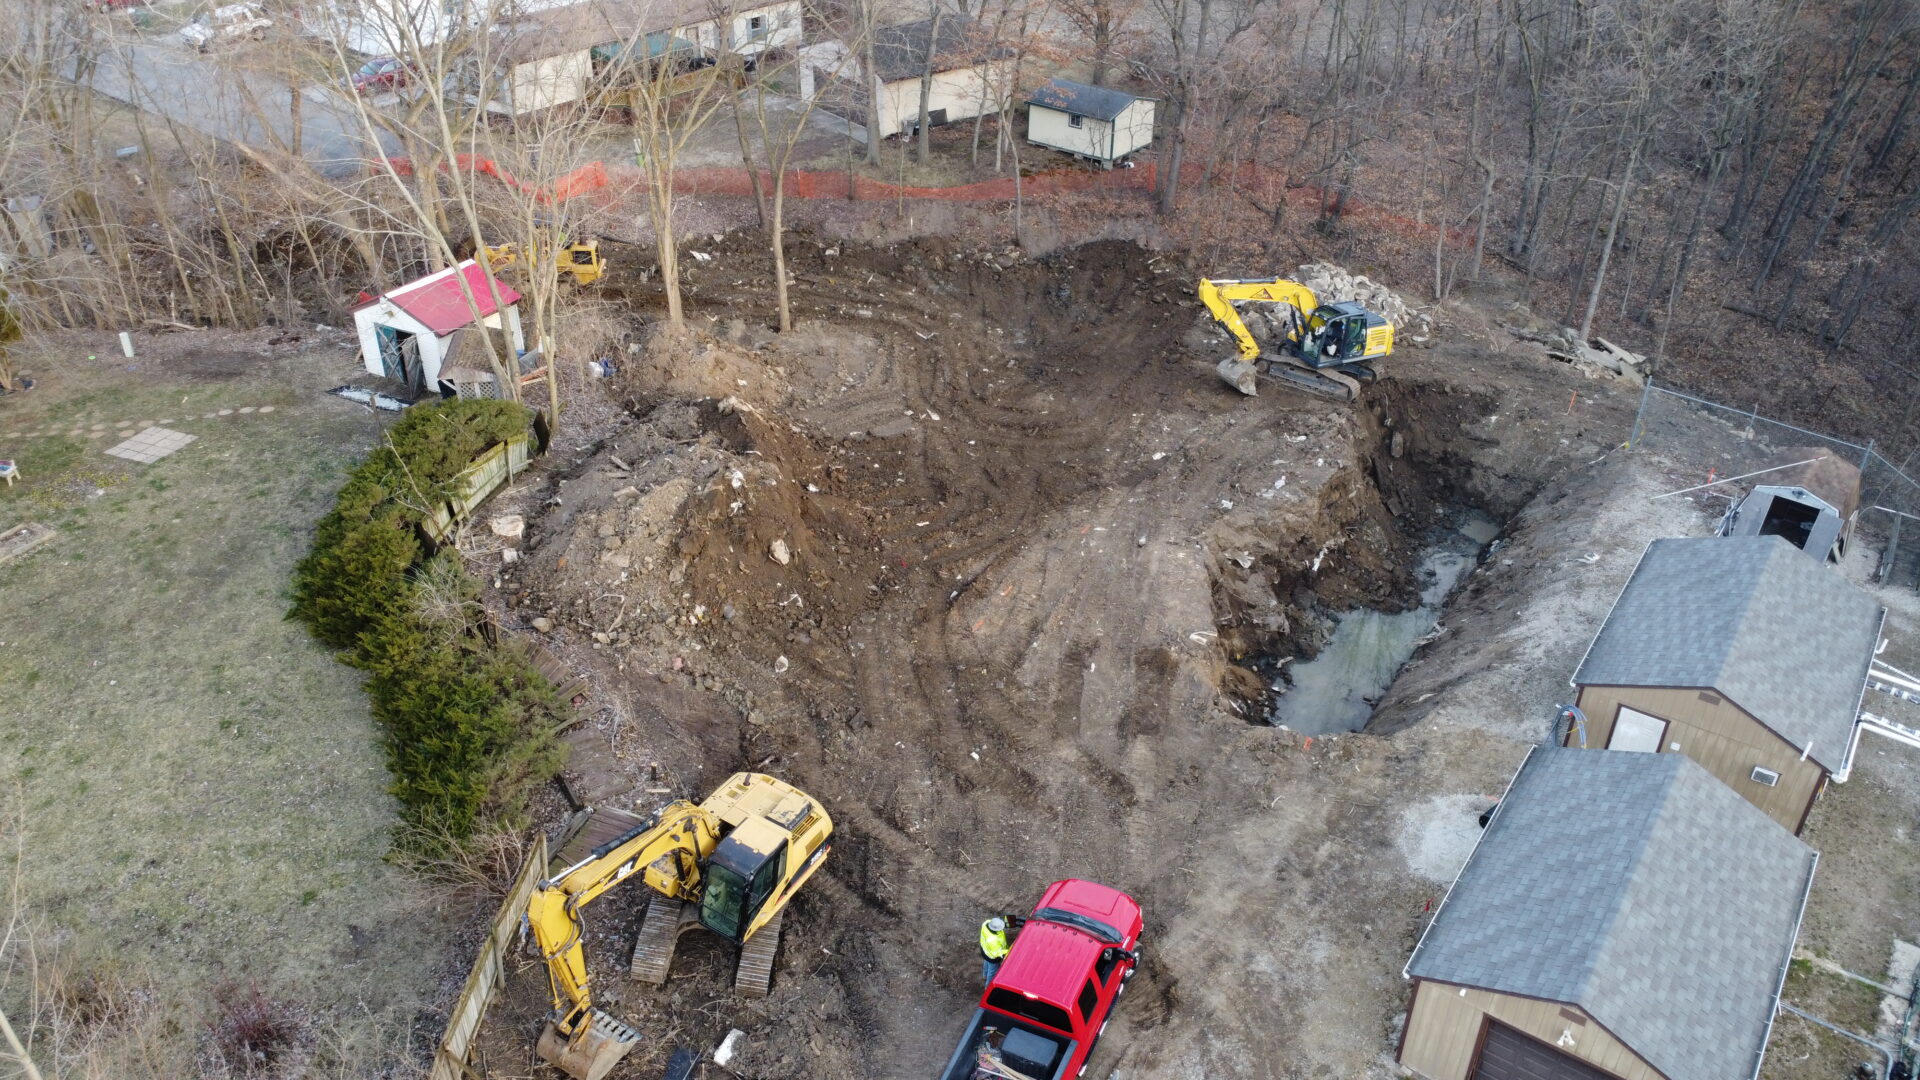 Aerial view of construction site with excavators and vehicles.